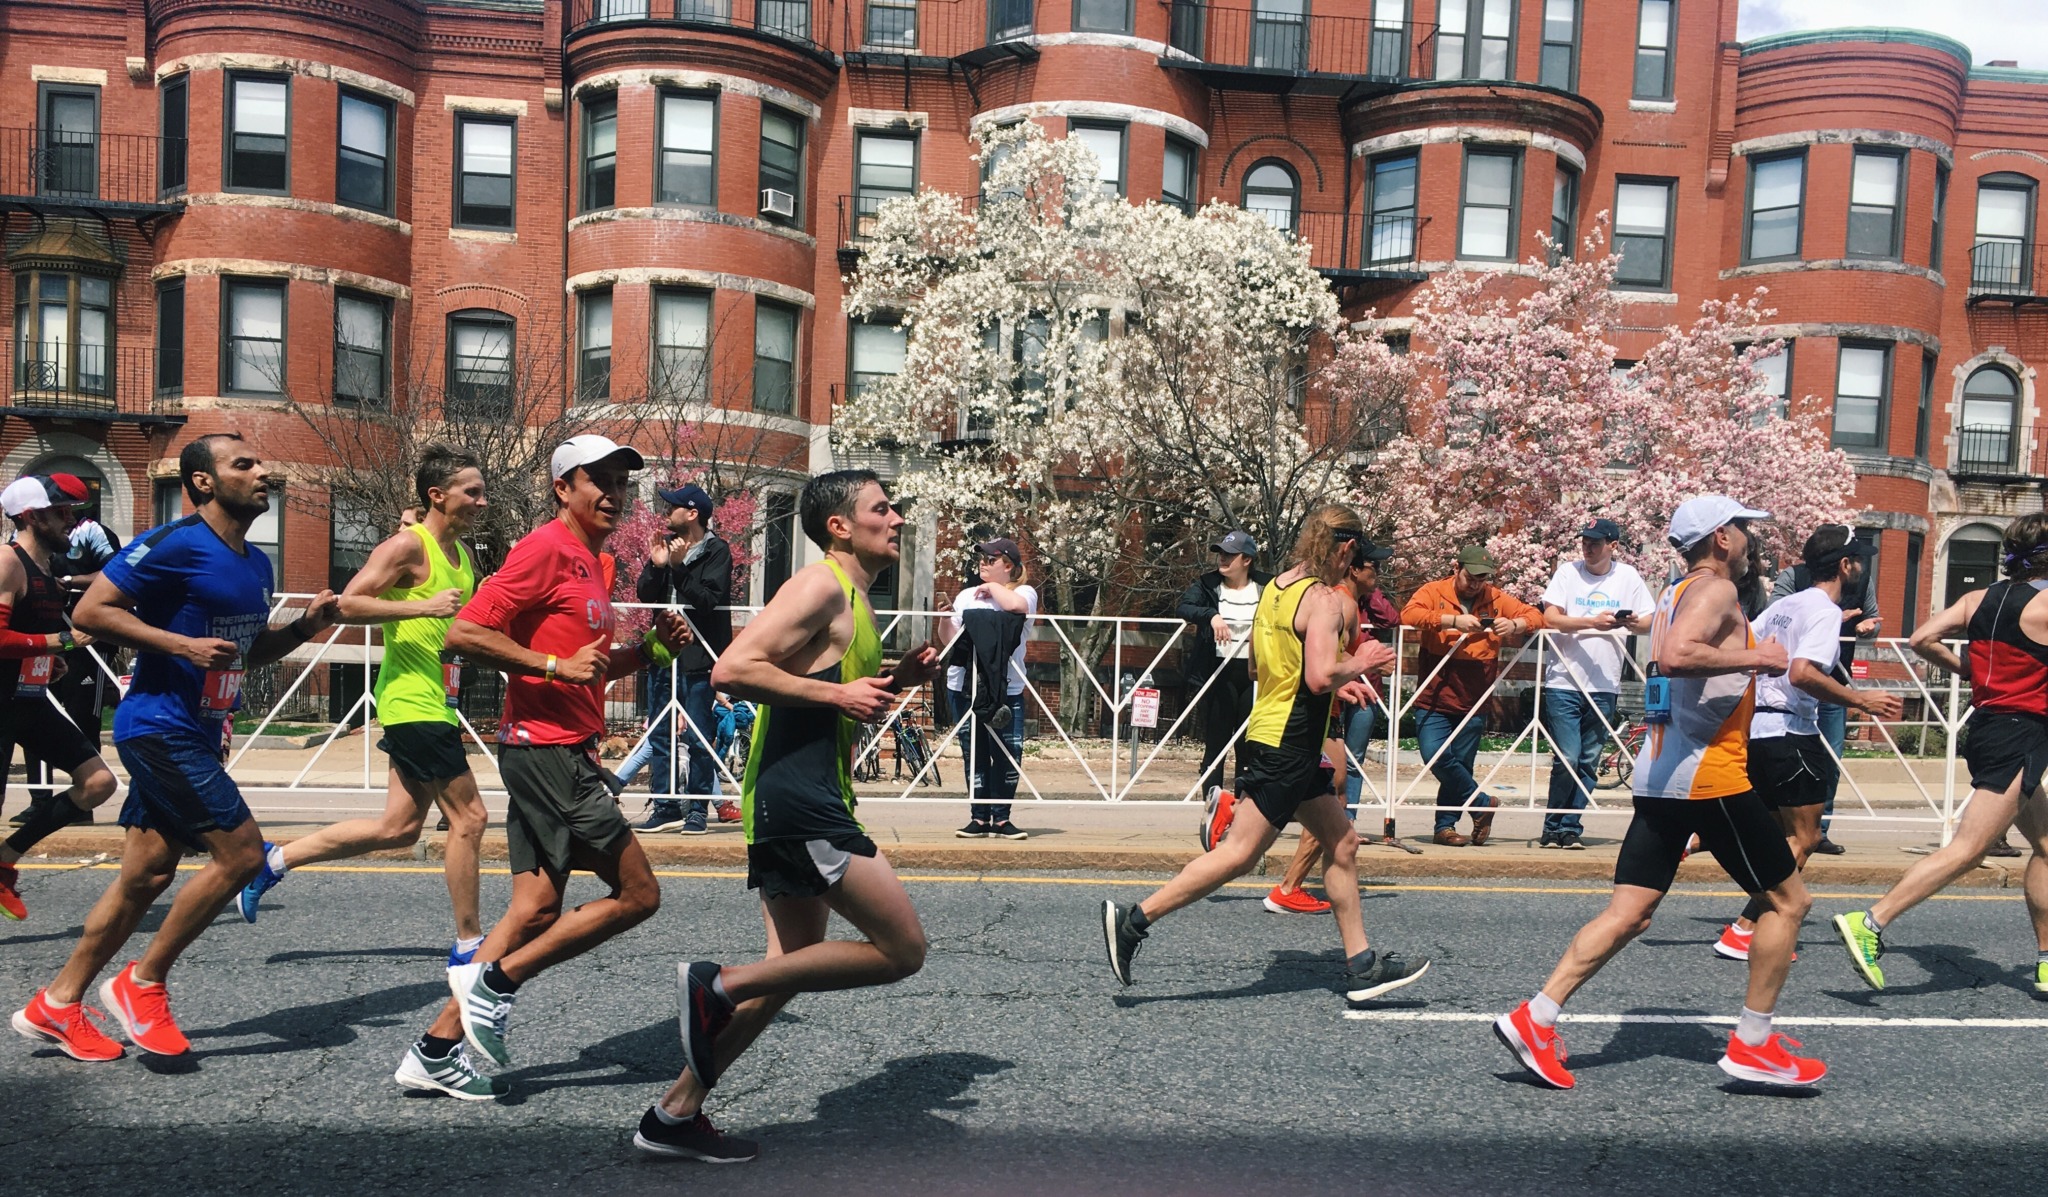 a group of runners passing by while competing in the Boston Marathon